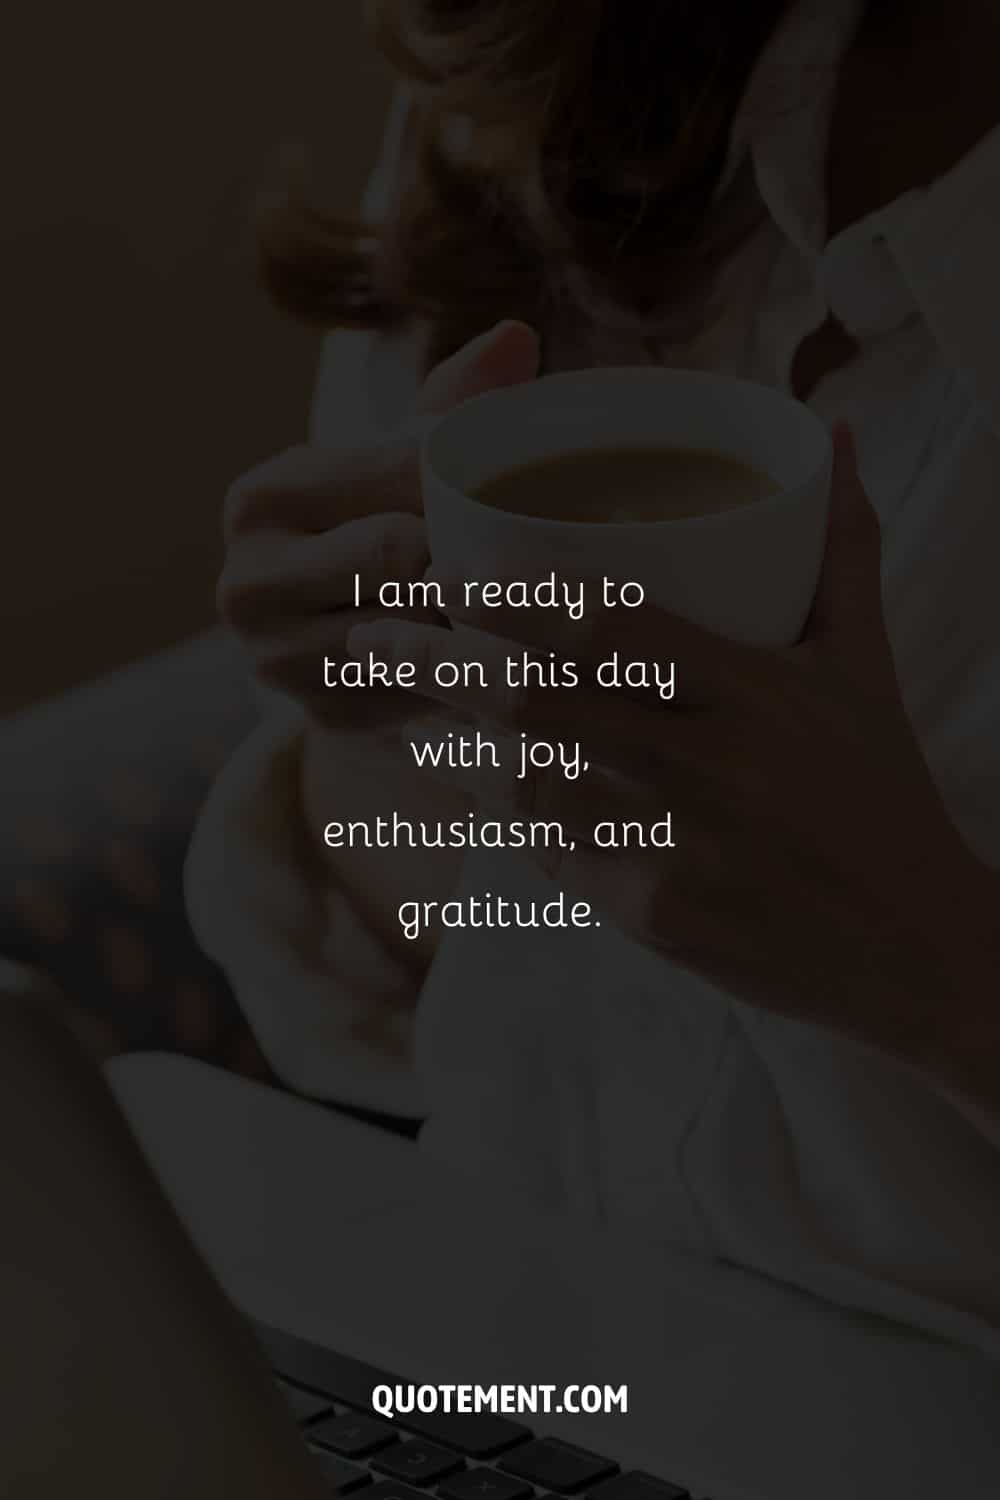 Image of a woman with a cup of coffee representing a morning affirmation.
